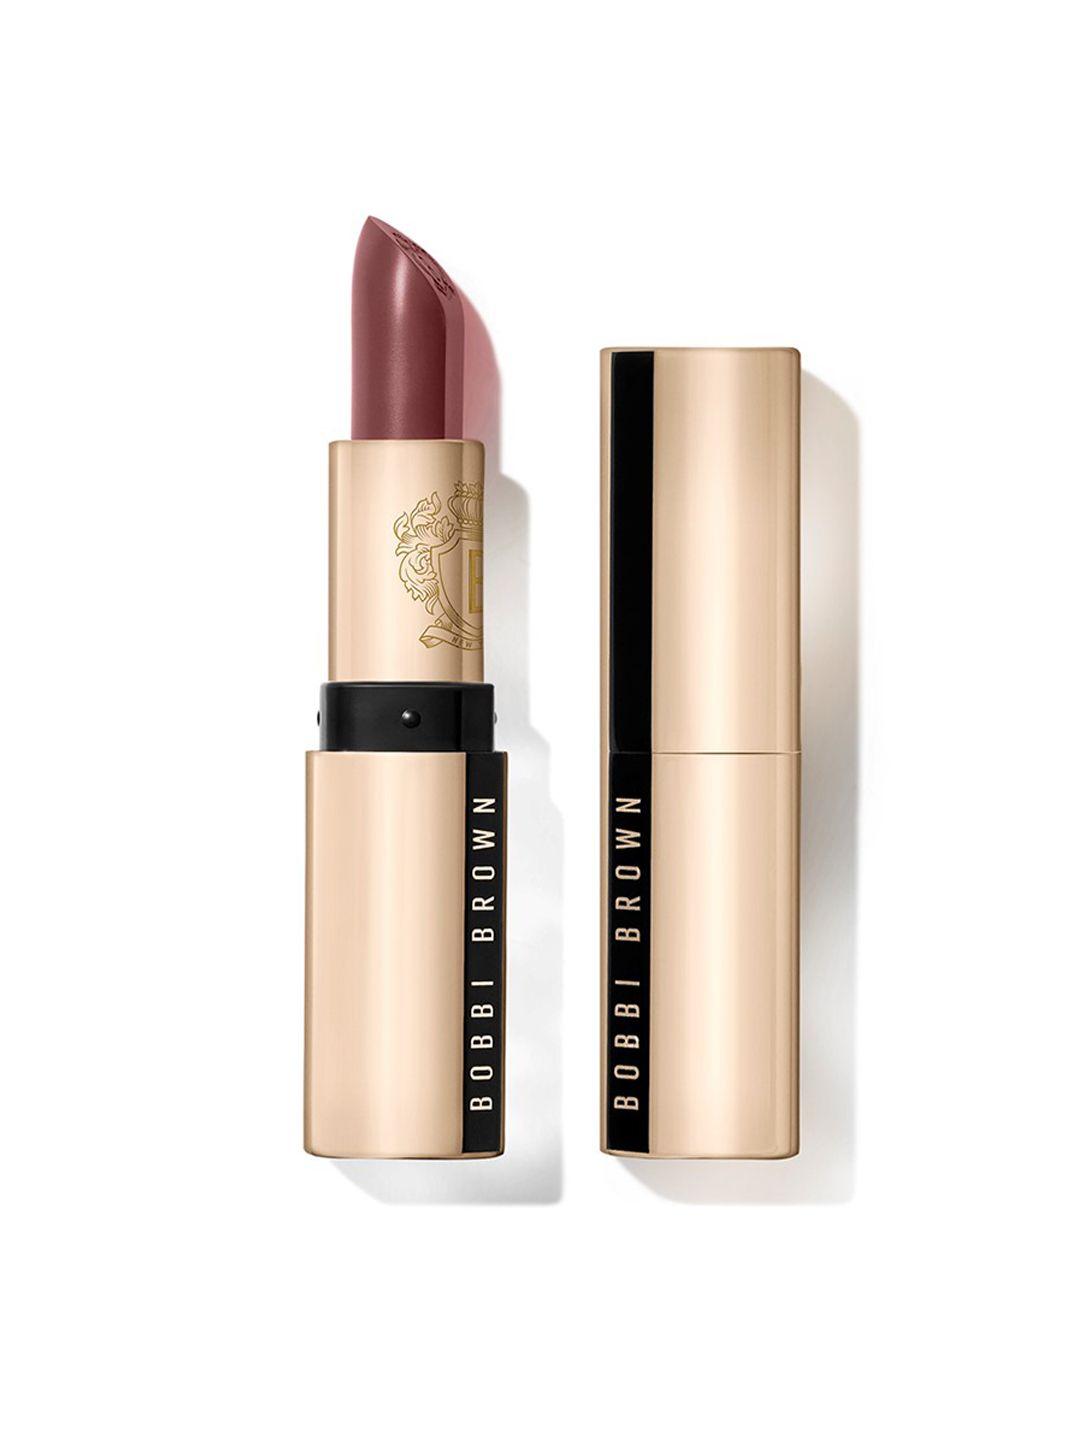 bobbi brown paraben-free bold moisture infused luxe lip color lipstick - downtown plum